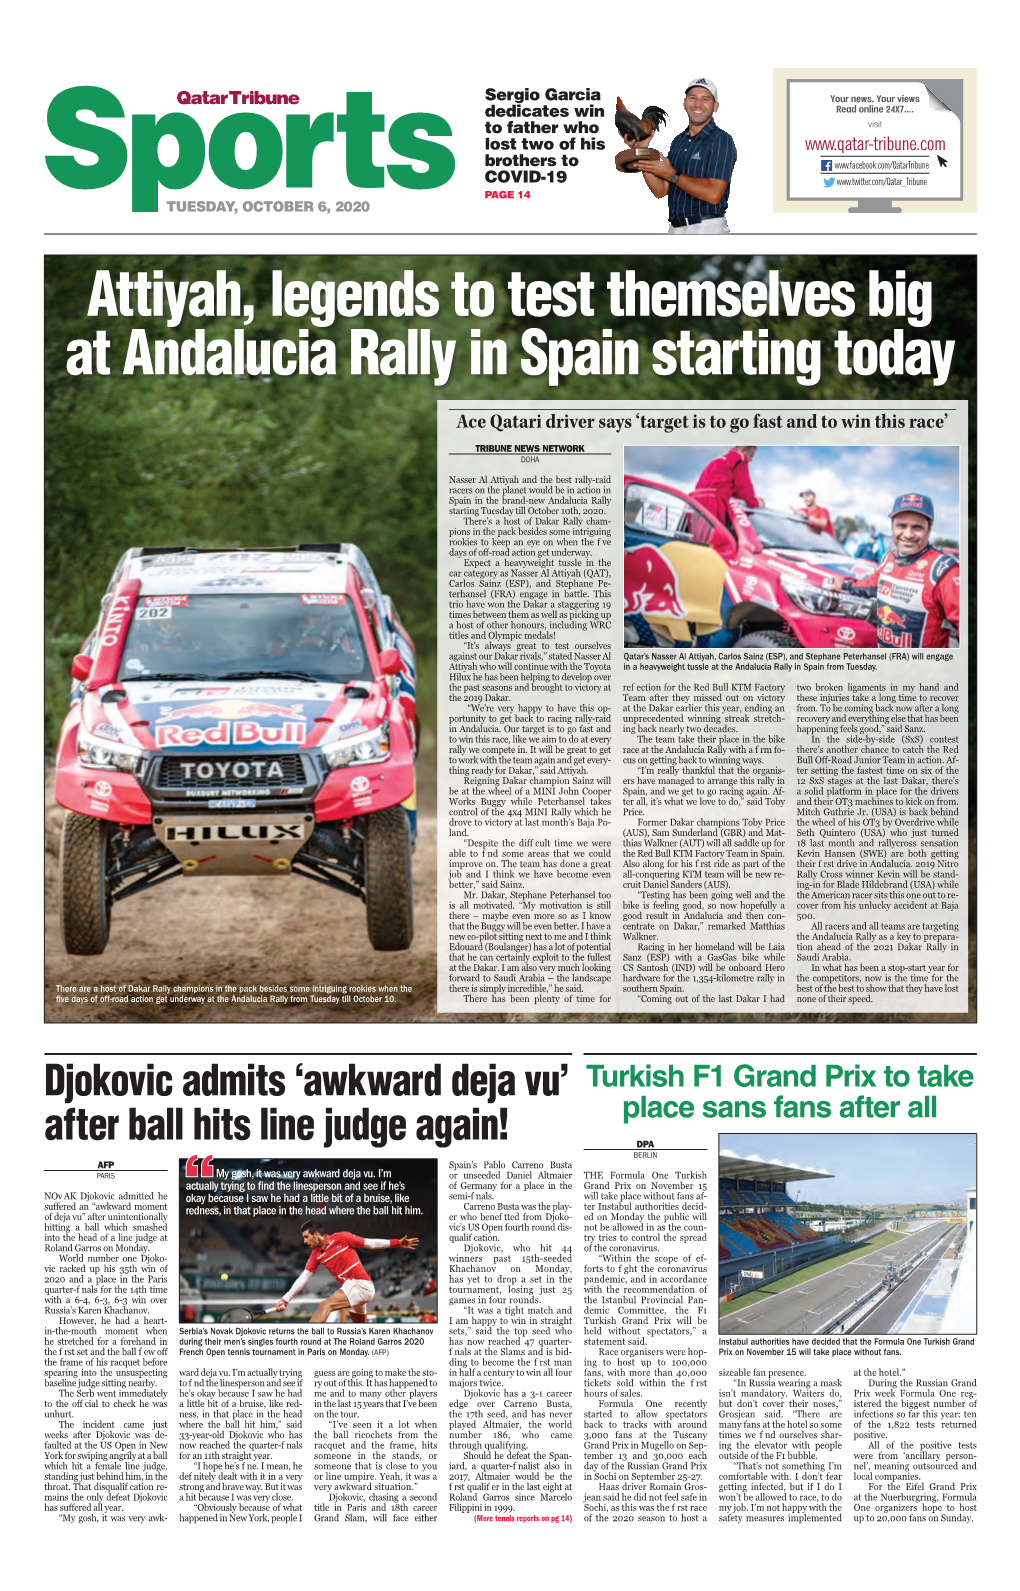 Attiyah, Legends to Test Themselves Big at Andalucia Rally in Spain Starting Today